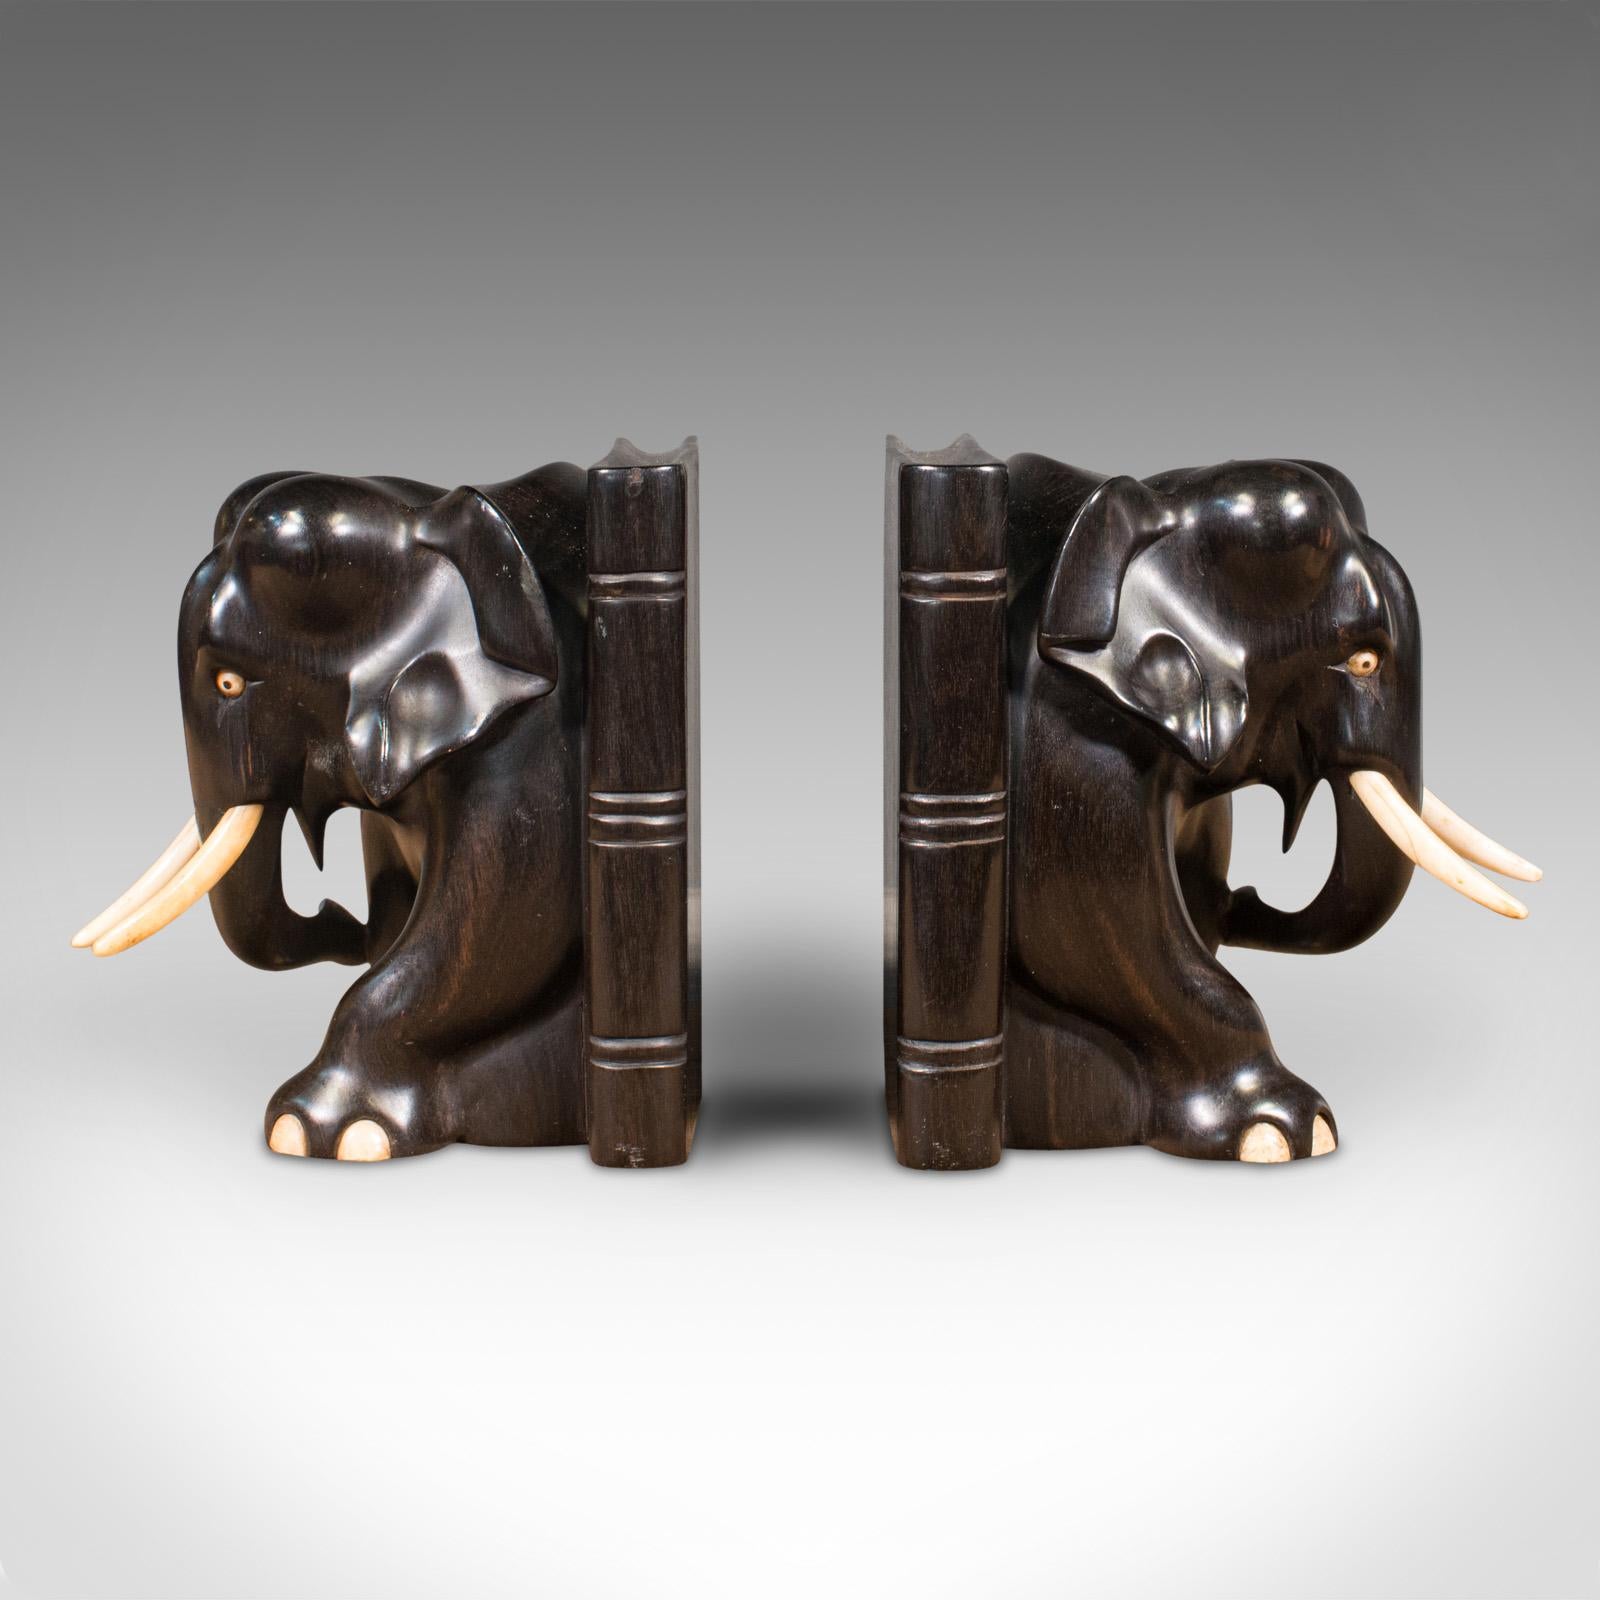 This is a pair of antique elephant bookends. An English, ebony and bone carved animal book rest, dating to the late Victorian period, circa 1890.

Superb character, offering a real treat for the book shelf
Displaying a desirable aged patina and